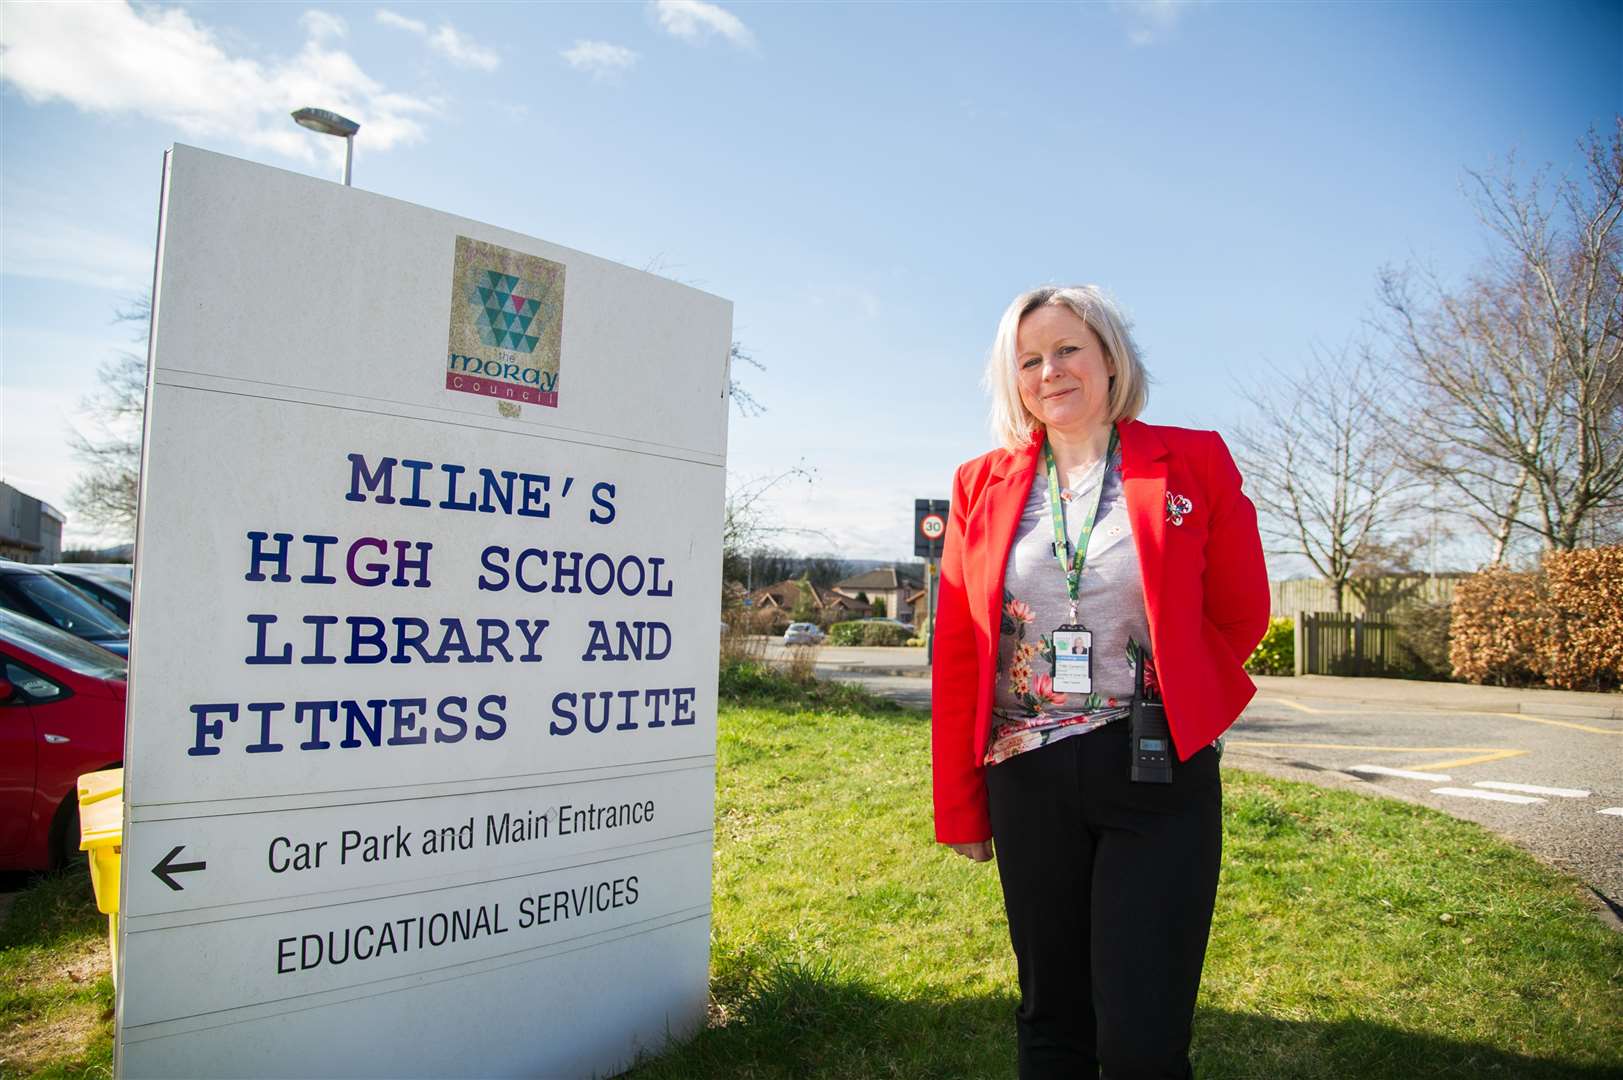 The crises of the past year have seen Milne's High School Rector Trish Cameron's team rise to the challenges. Picture: Becky Saunderson